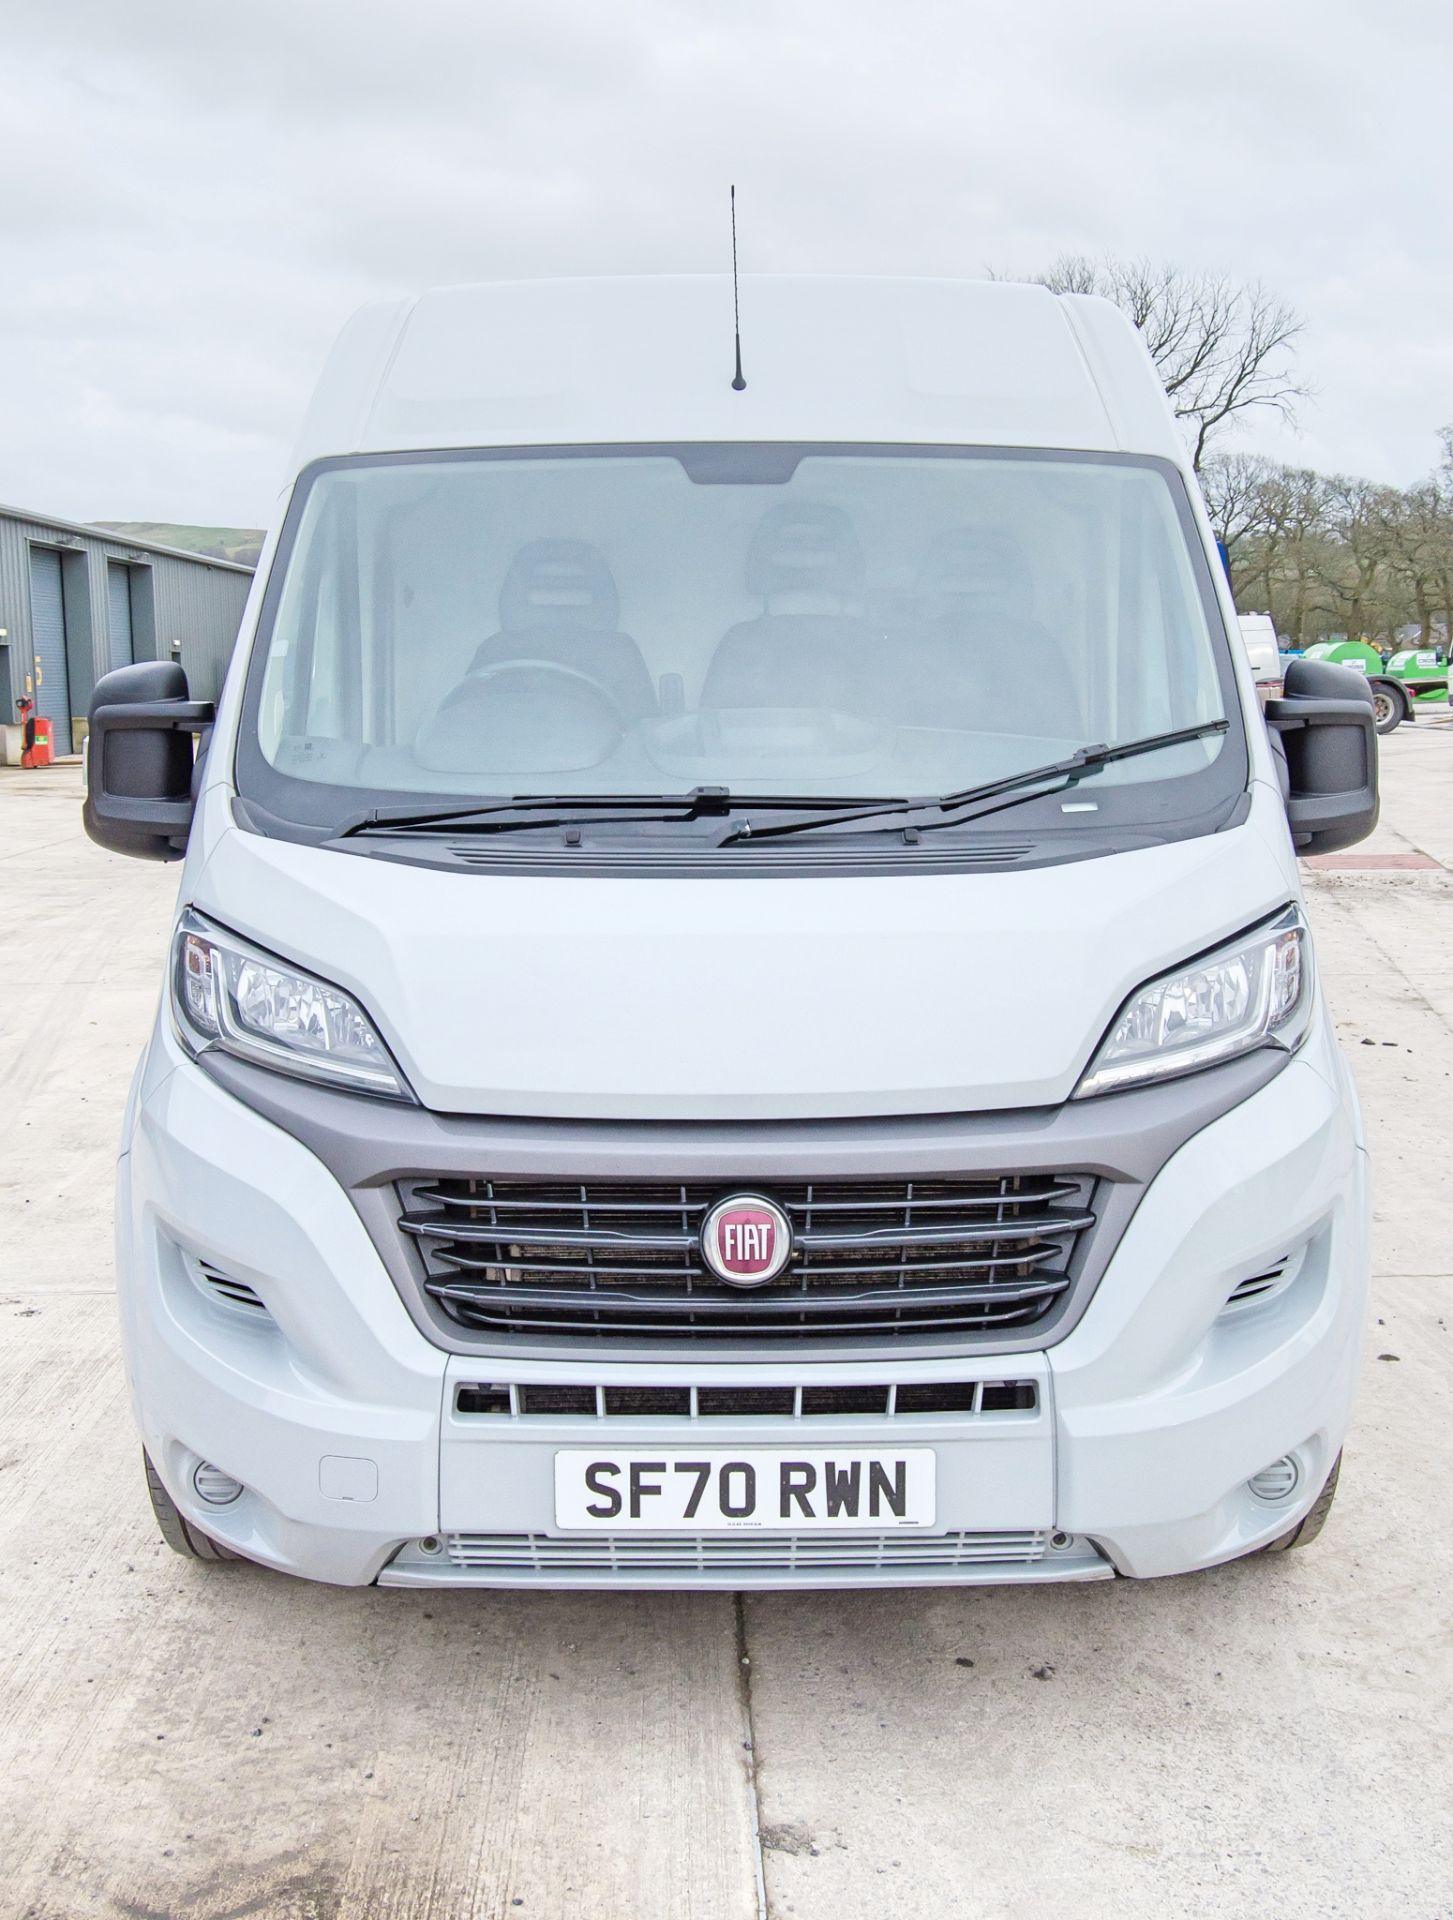 Fiat Ducato 35 Shadow 140 2.3 litre LWB panel van Registration Number: SF70 RWN Date of - Image 5 of 30